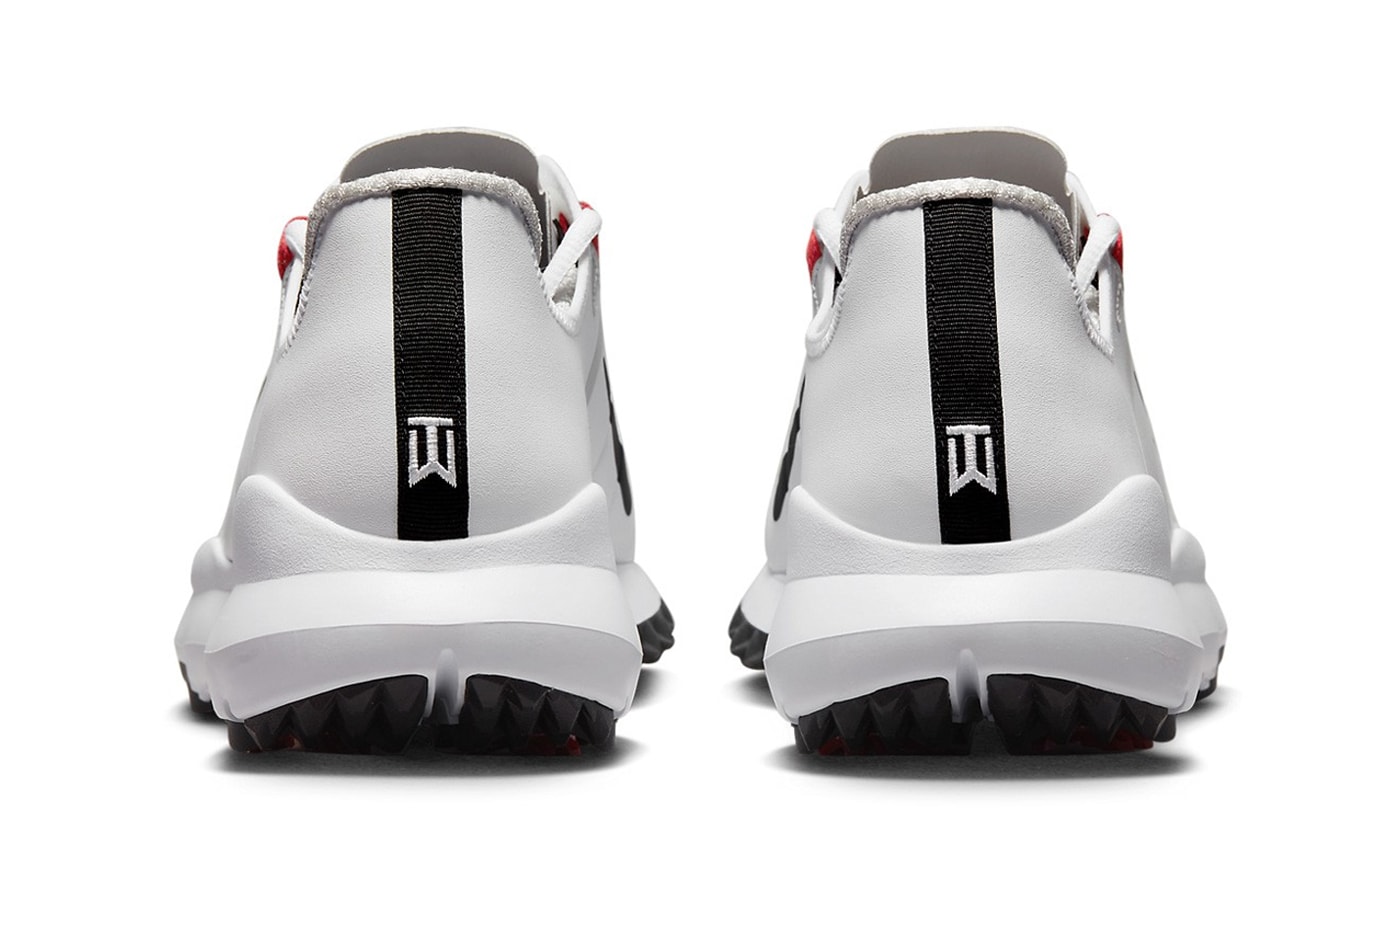 The Nike Tiger Woods '13 Makes Its Return | Hypebeast